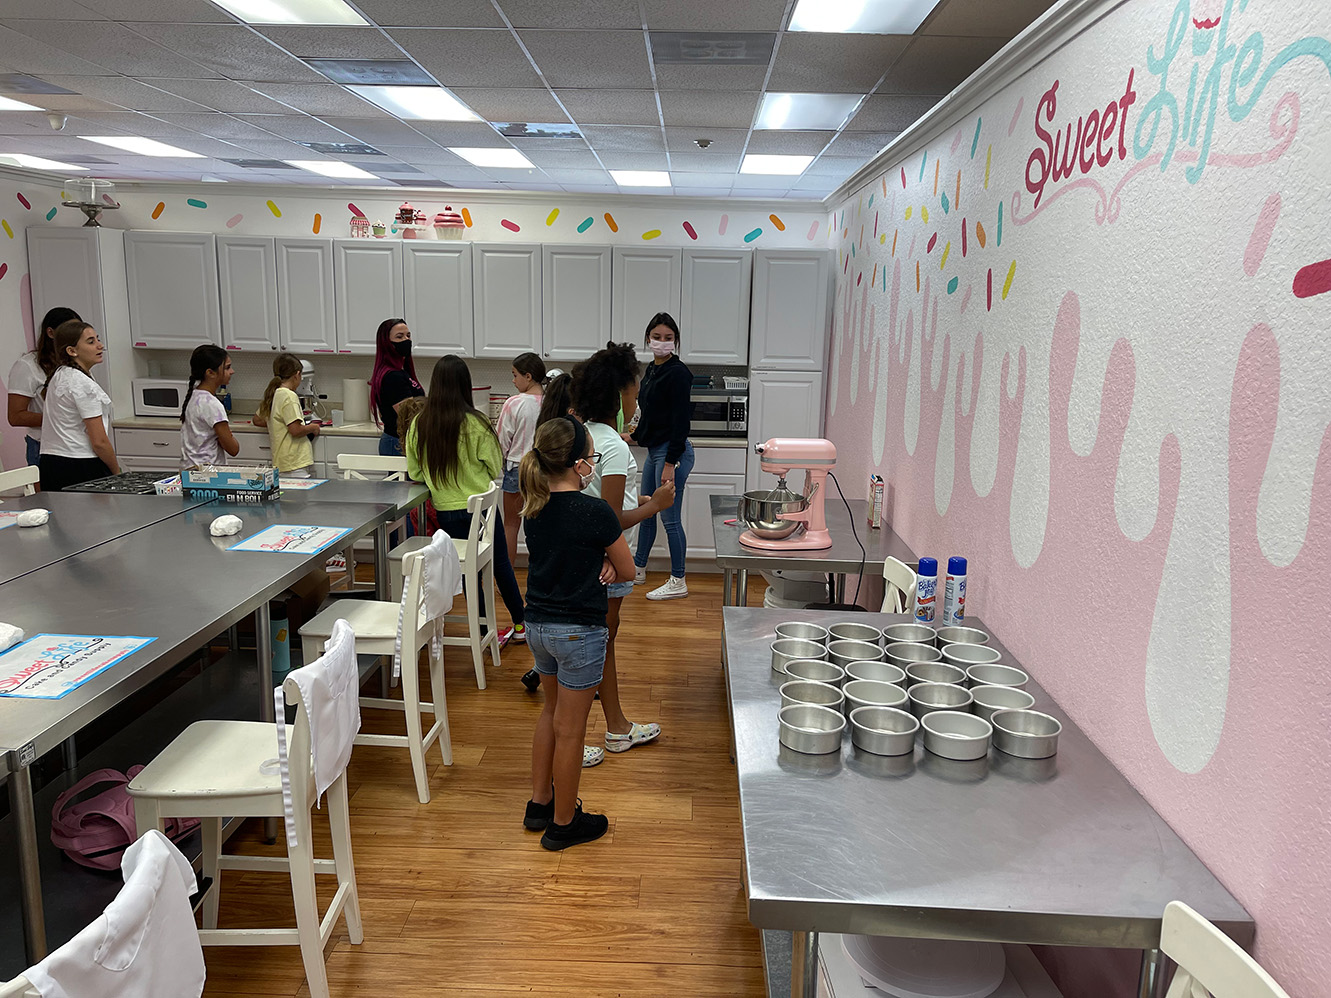 Children in the classroom learning about baking and cake decorating